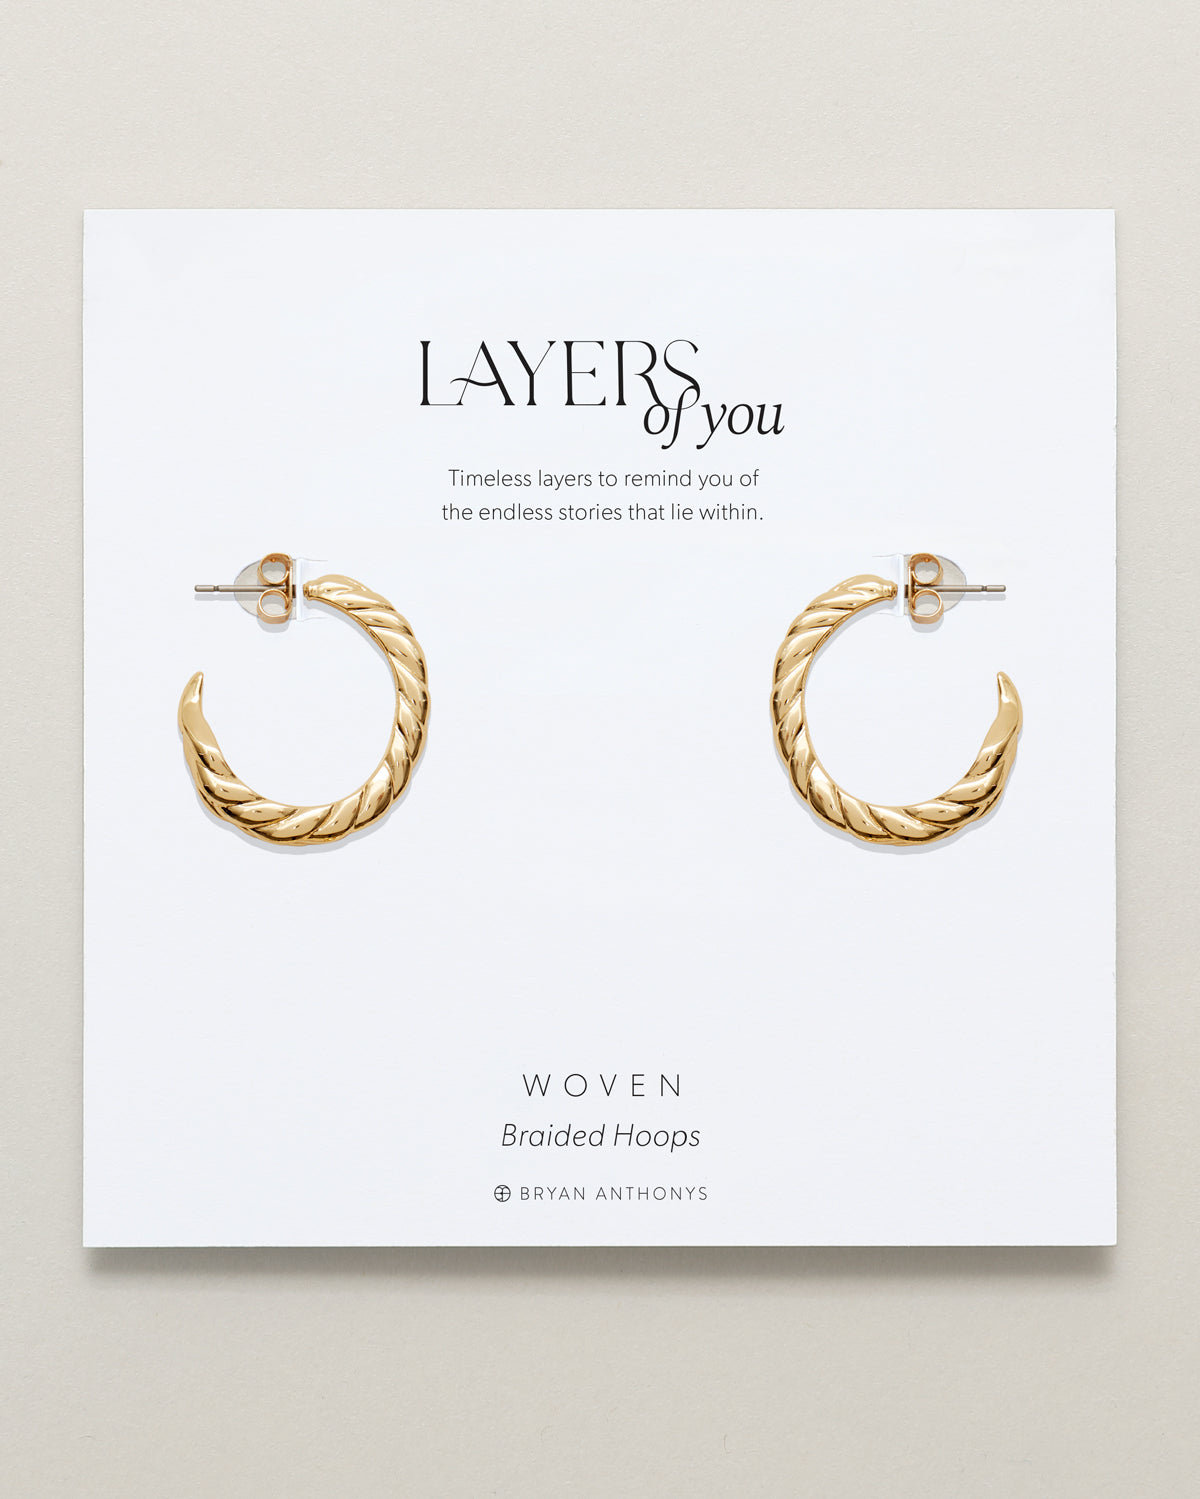 Bryan Anthonys Layers of You Gold Woven Braided Hoops On Card